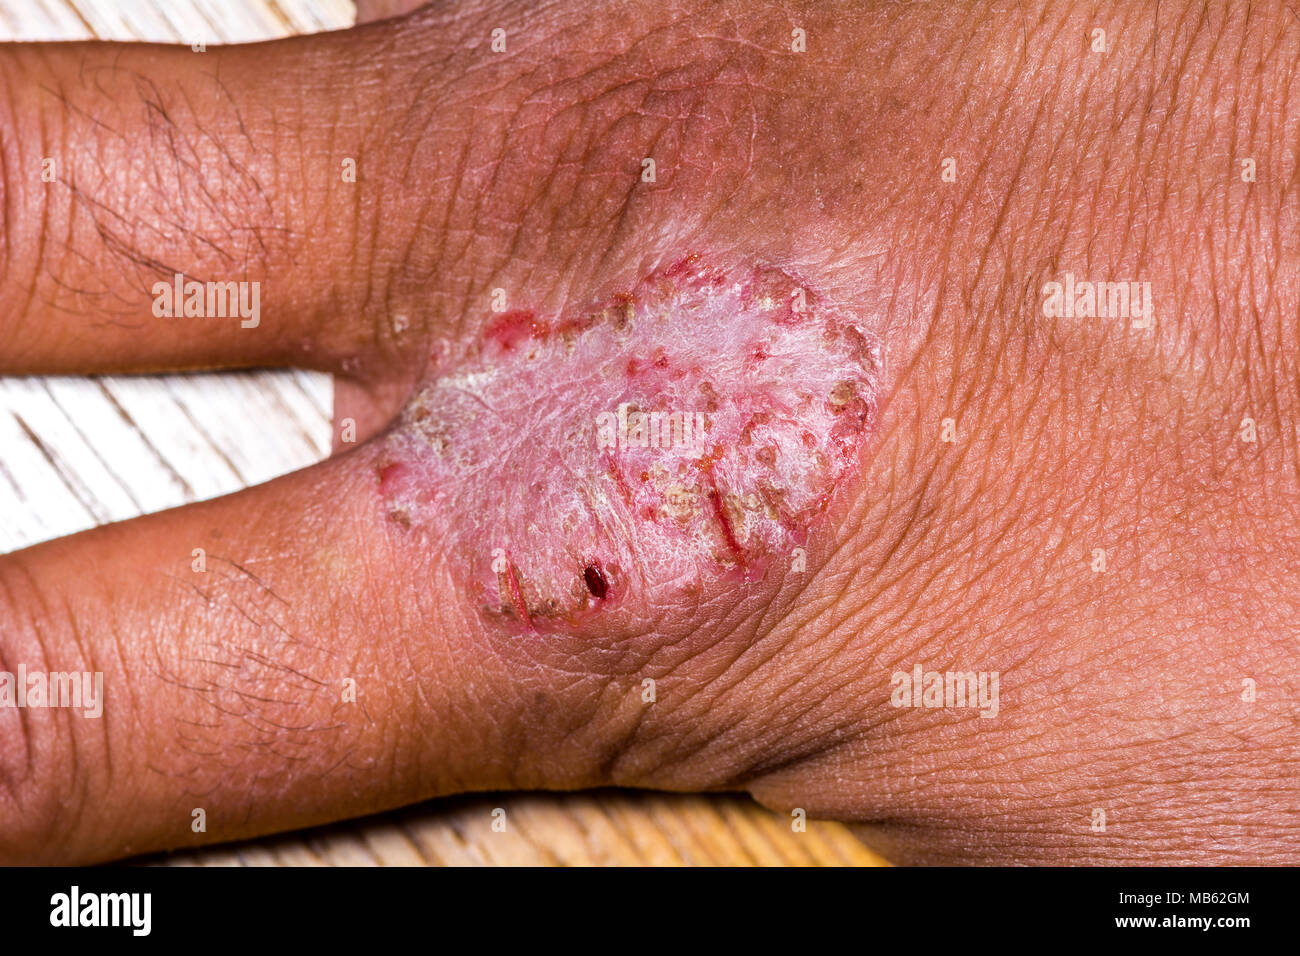 Close up of eczema or psoriasis on hand skin with open wounds, peel and crust. Stock Photo